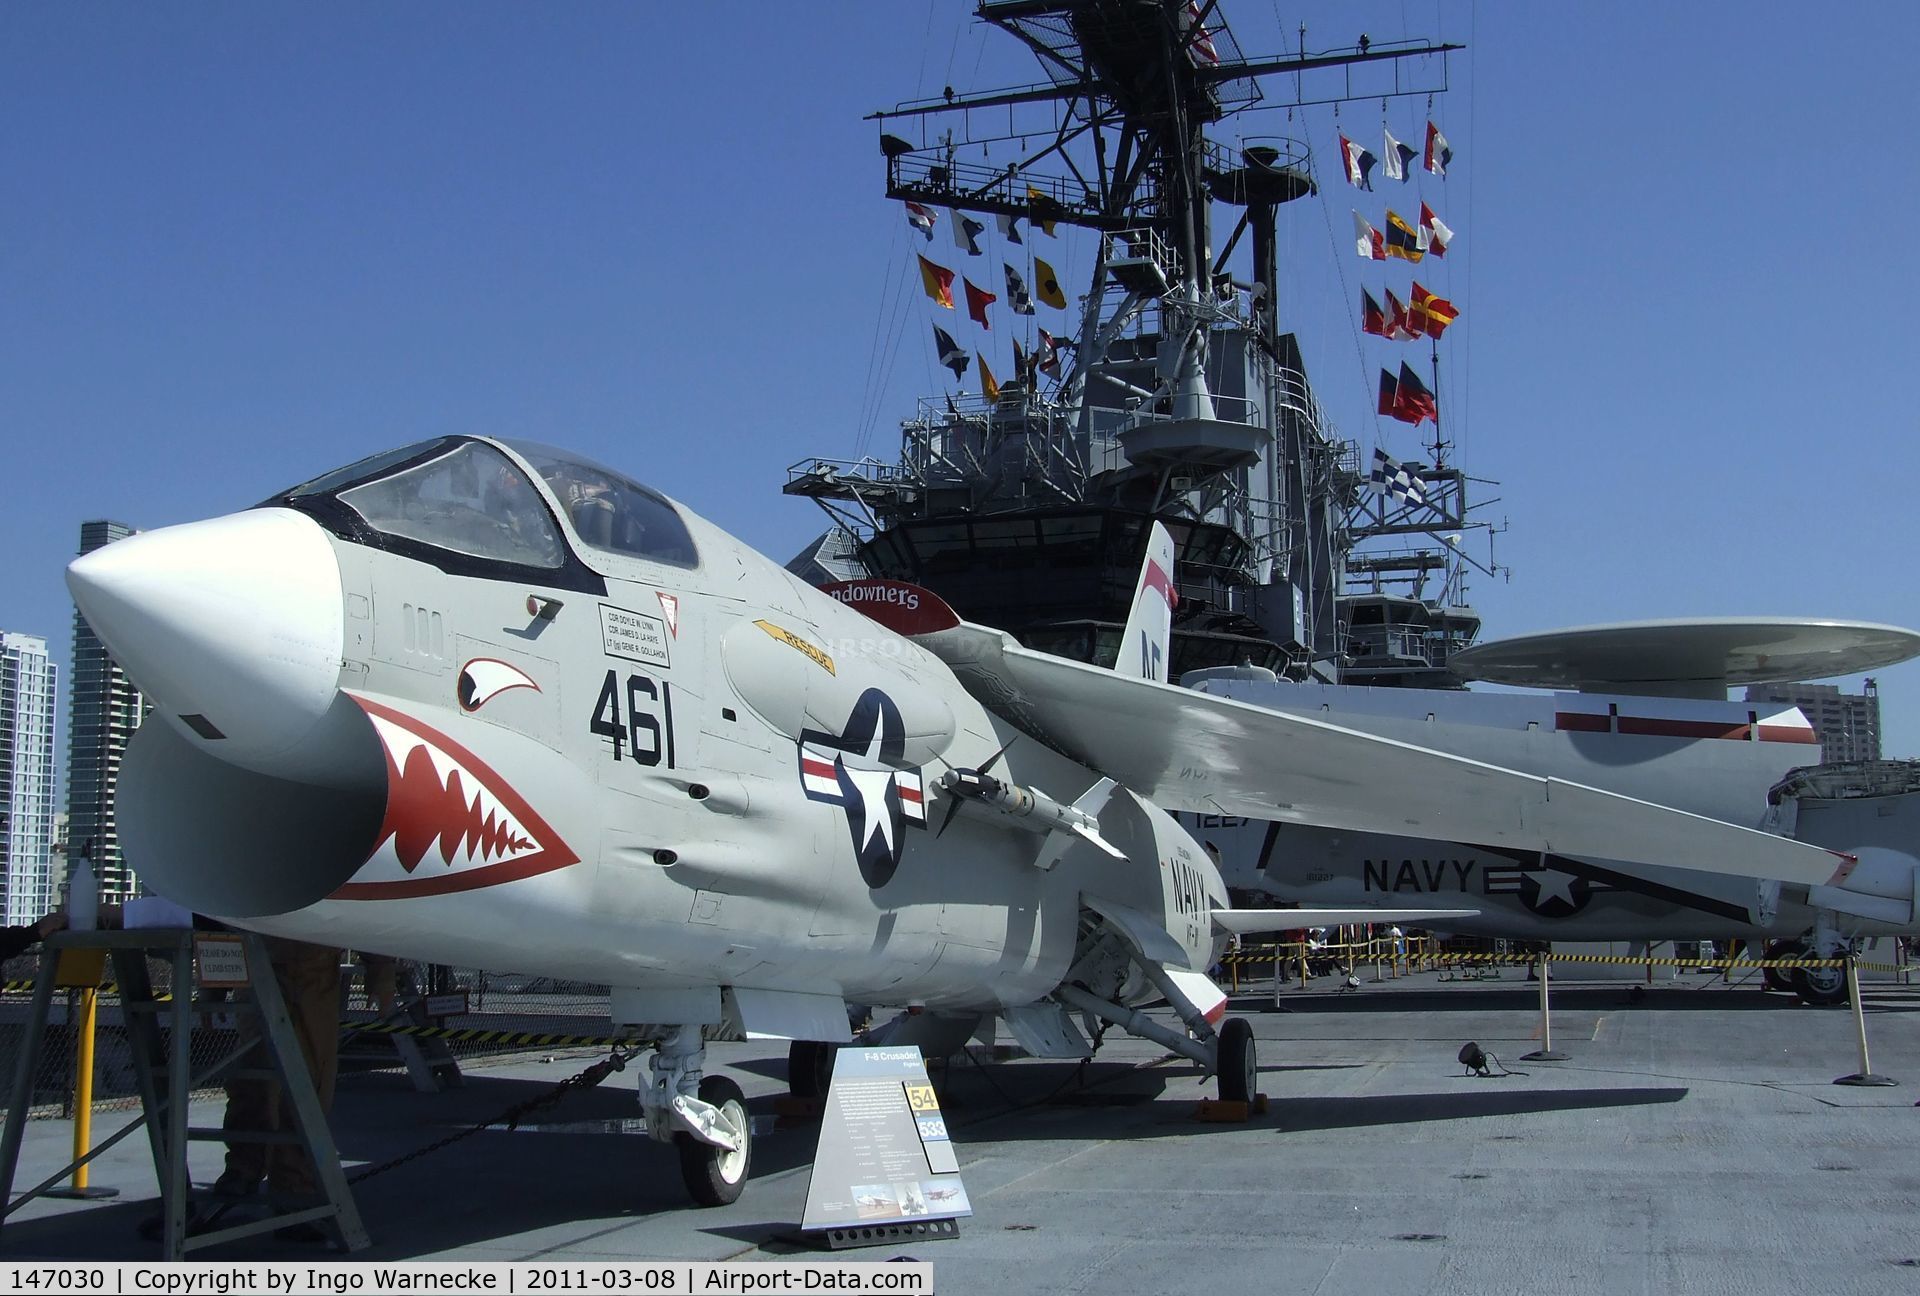 147030, Vought F-8K Crusader C/N 788, Vought F-8K Crusader on the flight deck of the USS Midway Museum, San Diego CA